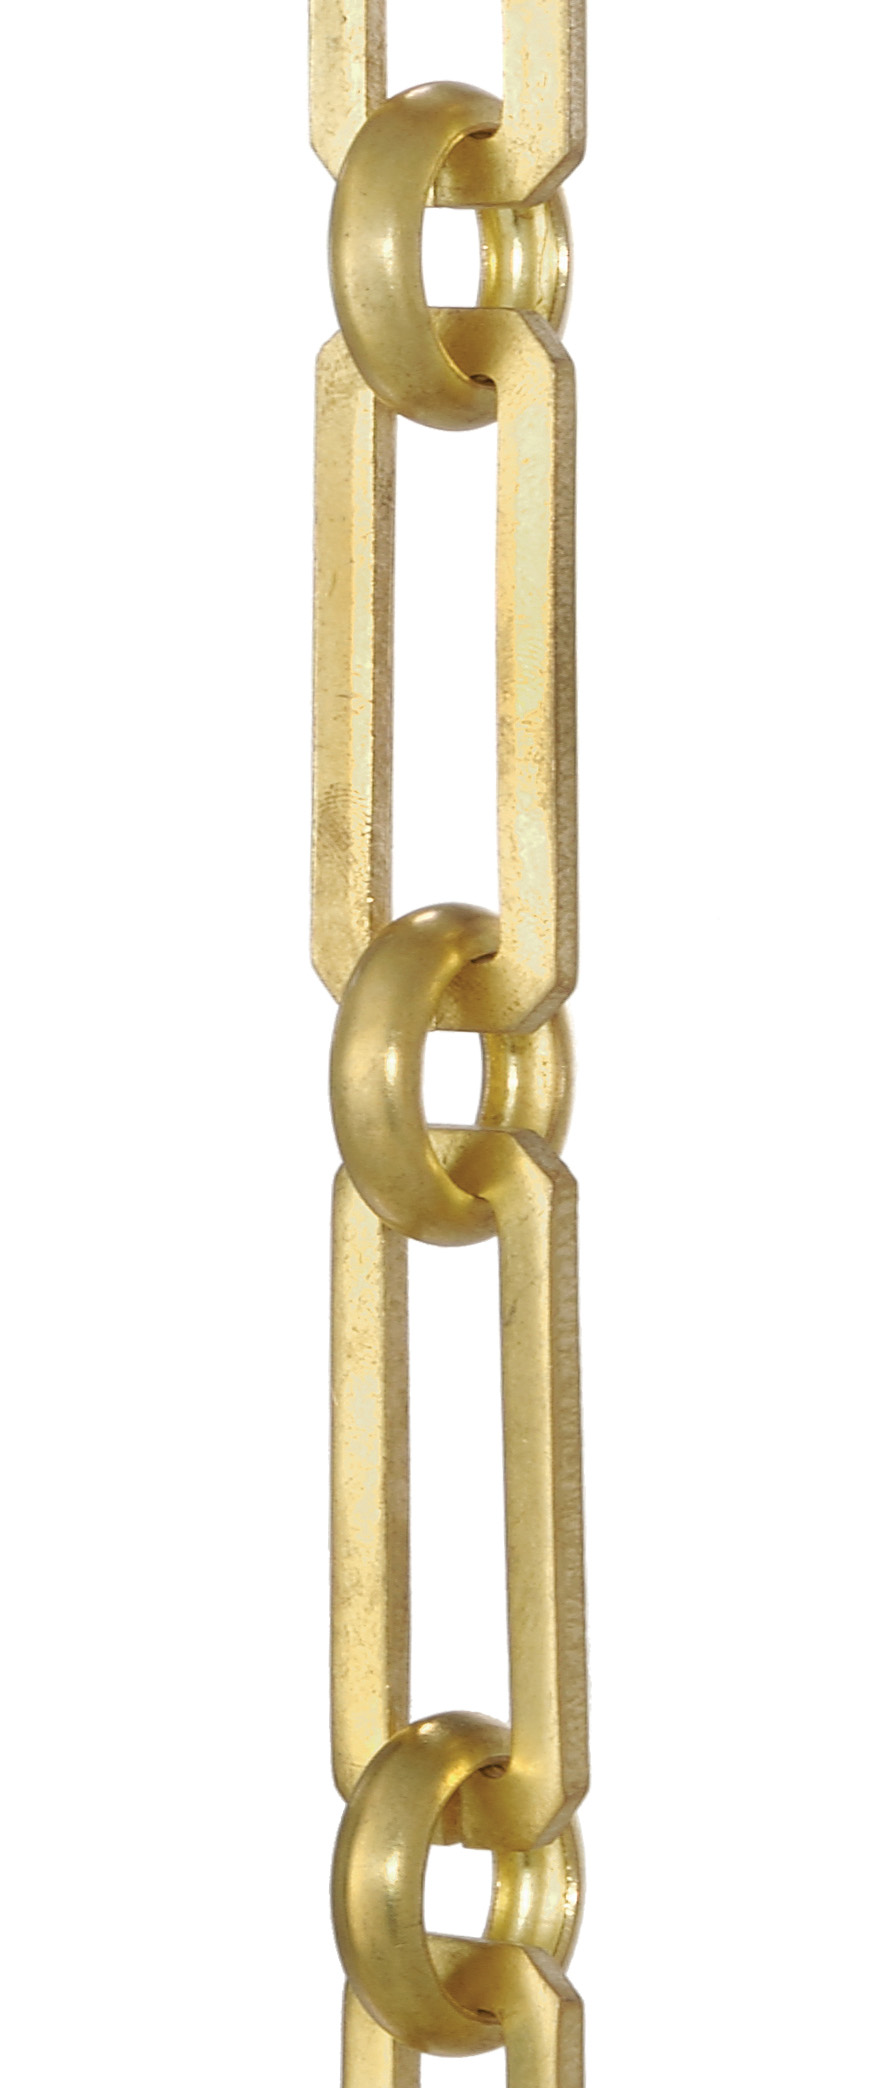 B&p Lamp Small, Brass Plated Steel Dec. Chain, 3 ft. Length